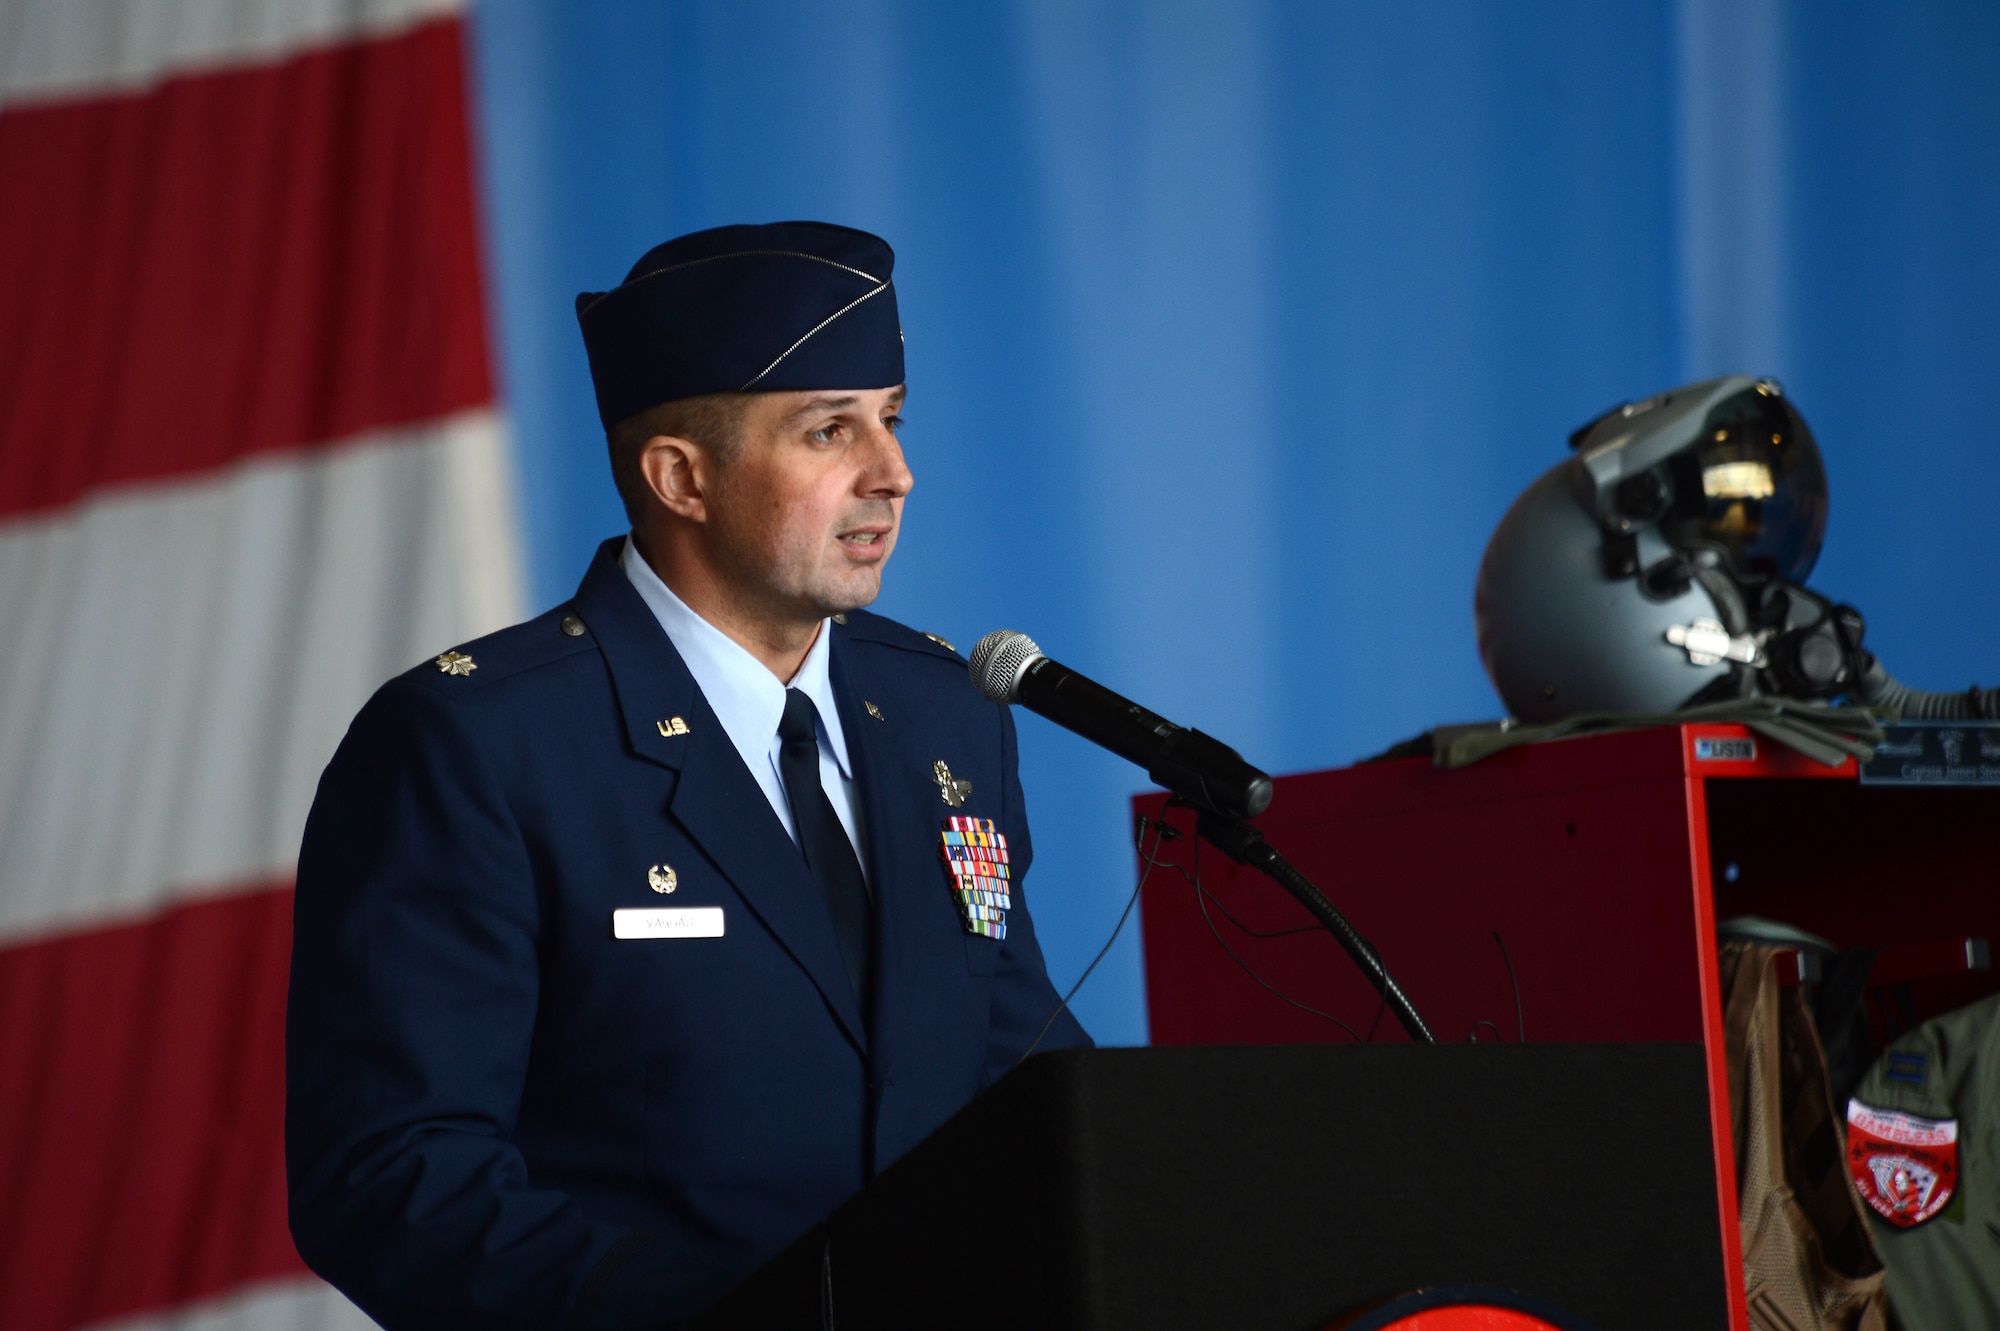 U.S. Air Force Lt. Col. Johnny Vargas, 77th Fighter Squadron commander, speaks at a memorial ceremony at Shaw Air Force Base, S.C., April 30, 2013.  The memorial ceremony commemorated the life and accomplishments of Capt. James Steel, 77th Fighter Squadron pilot, who died in an F-16 Fighting Falcon aircraft accident, while deployed to Afghanistan.  (U.S. Air Force photo by Airman 1st Class Nicole Sikorski/Released)